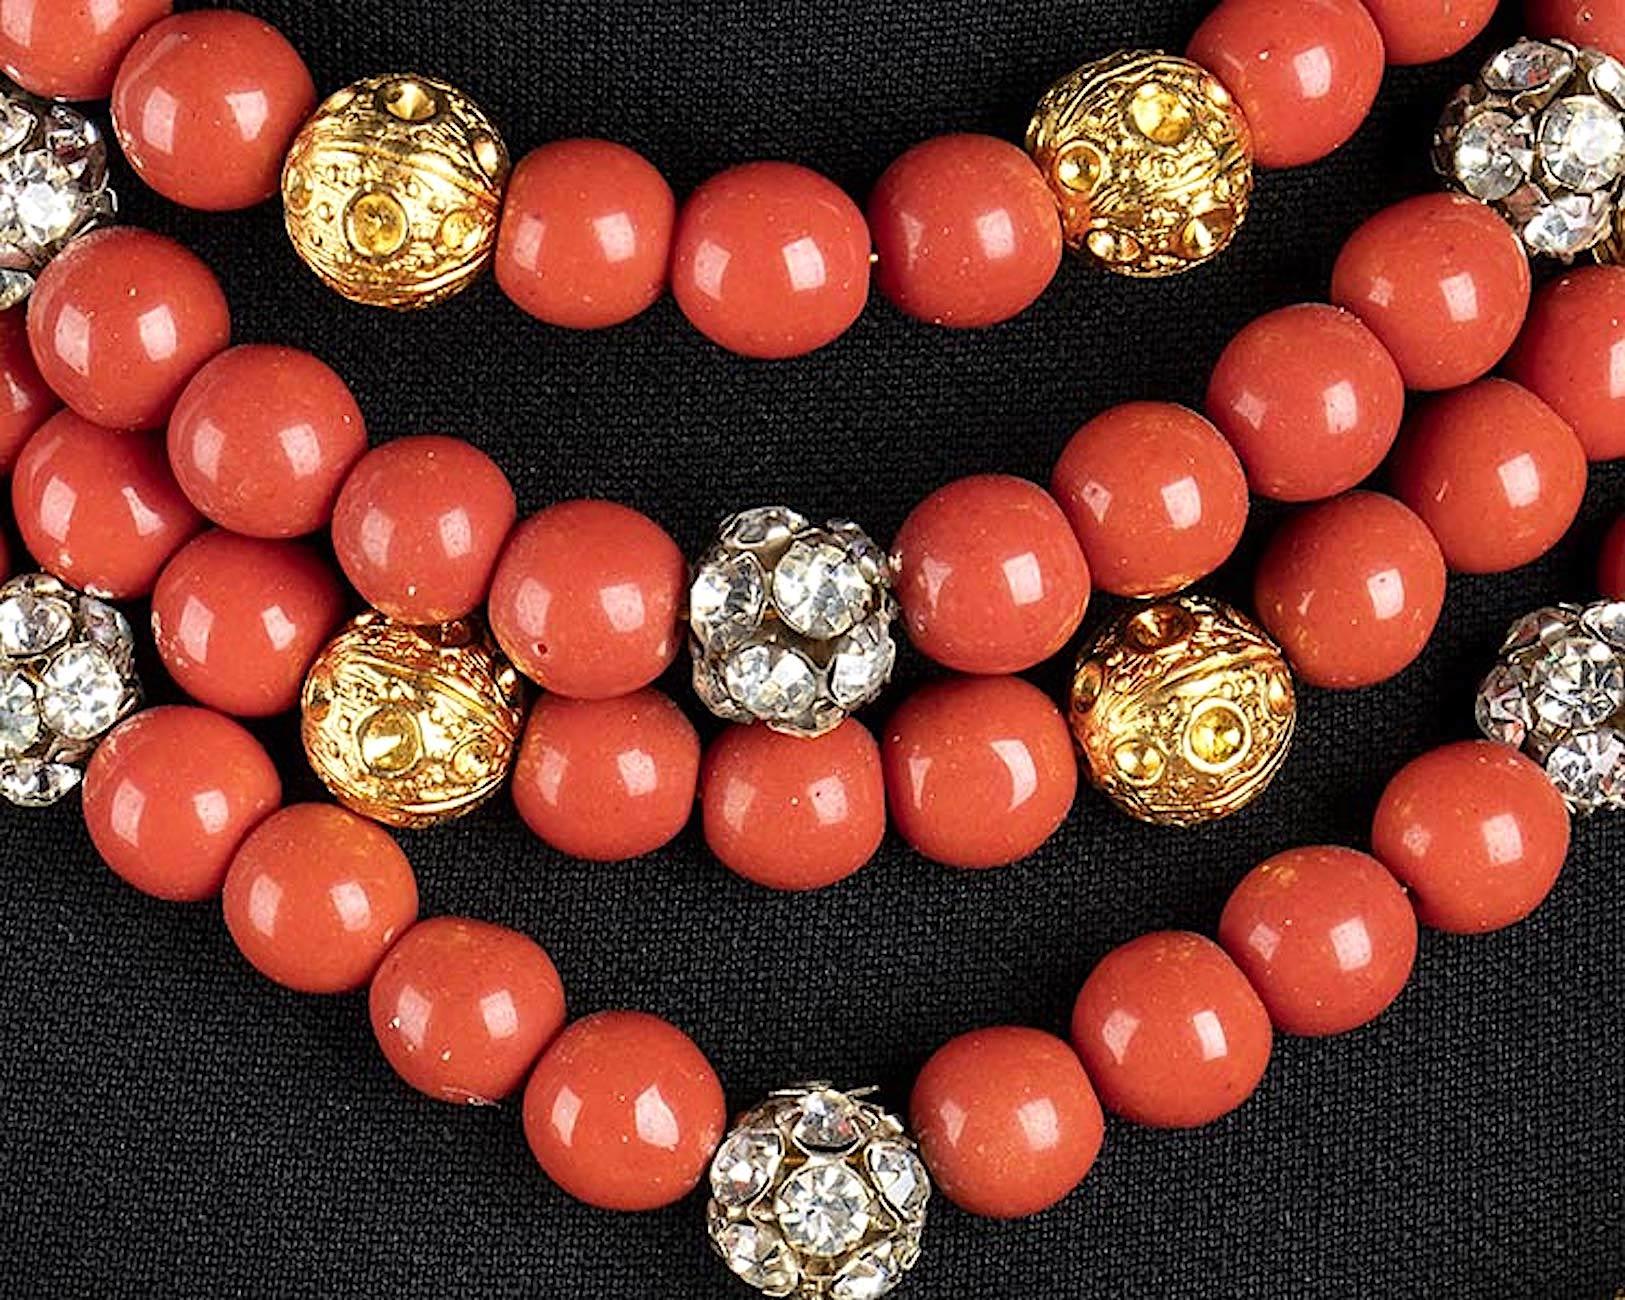 Women's Principessa Helietta Caracciolo Faux Red Coral Choker Necklace and Earrings